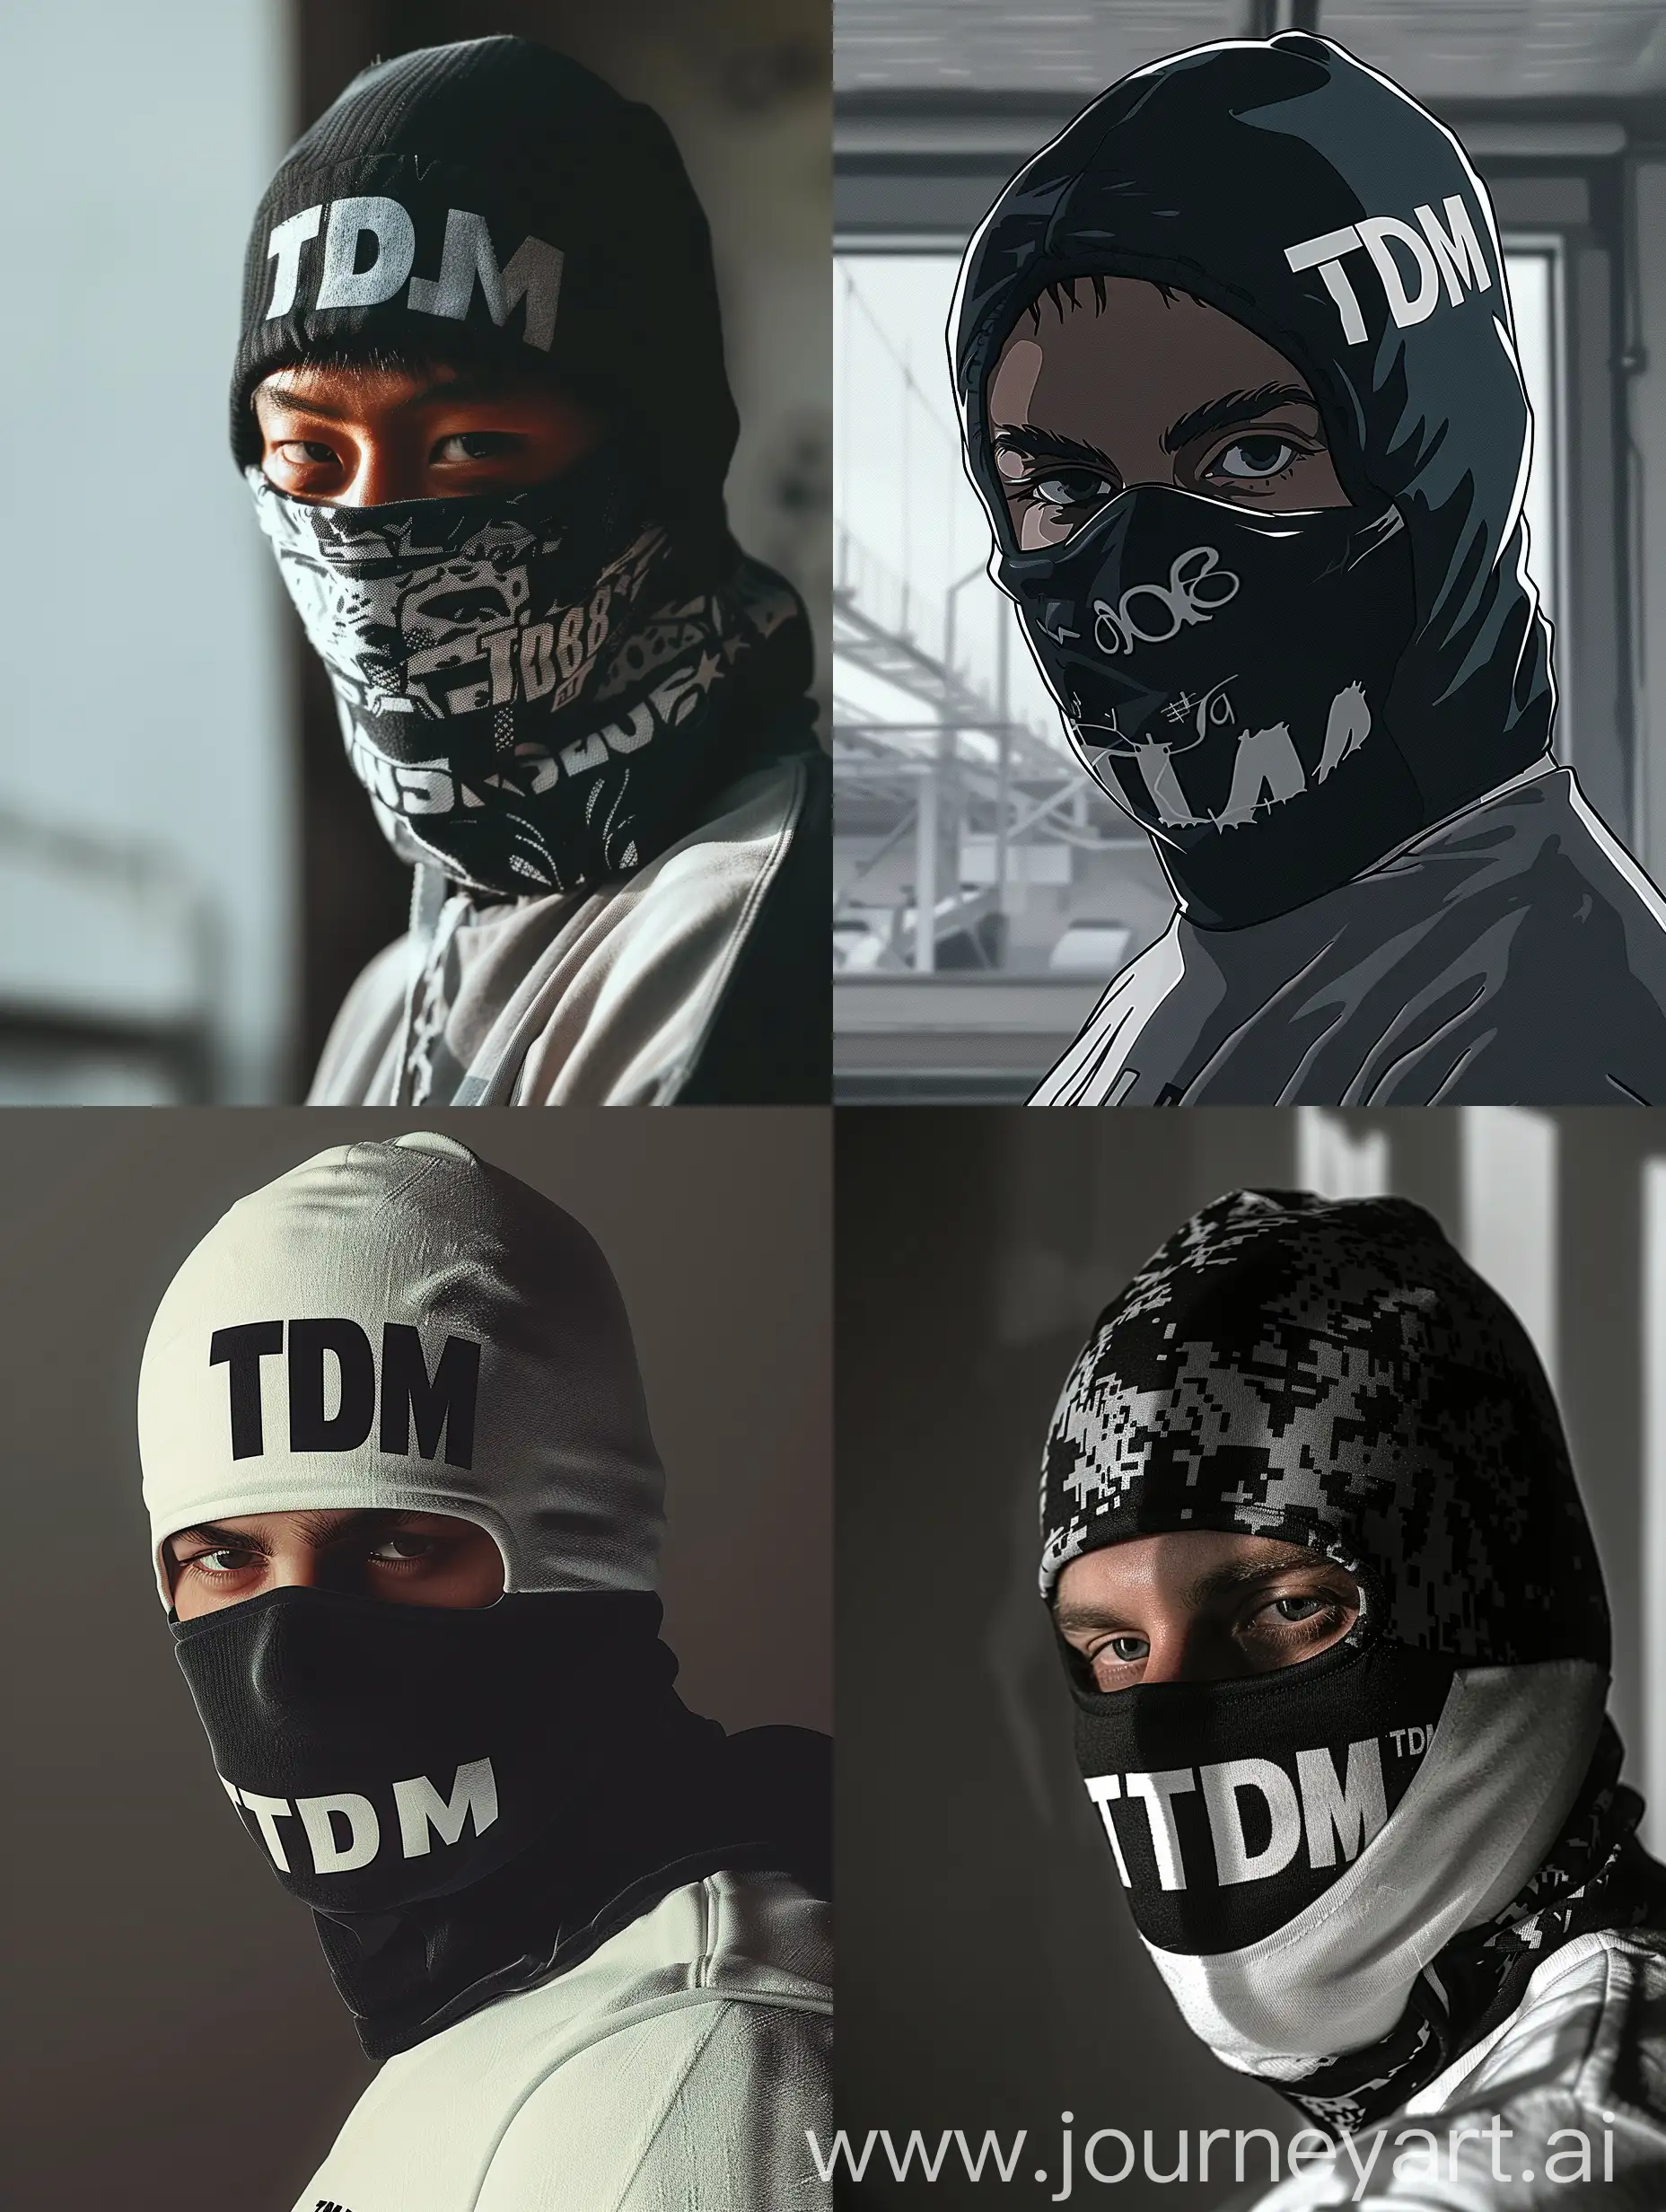 Mysterious-Figure-in-TDM08-Balaclava-Gazes-into-the-Camera-in-Cartoon-Style